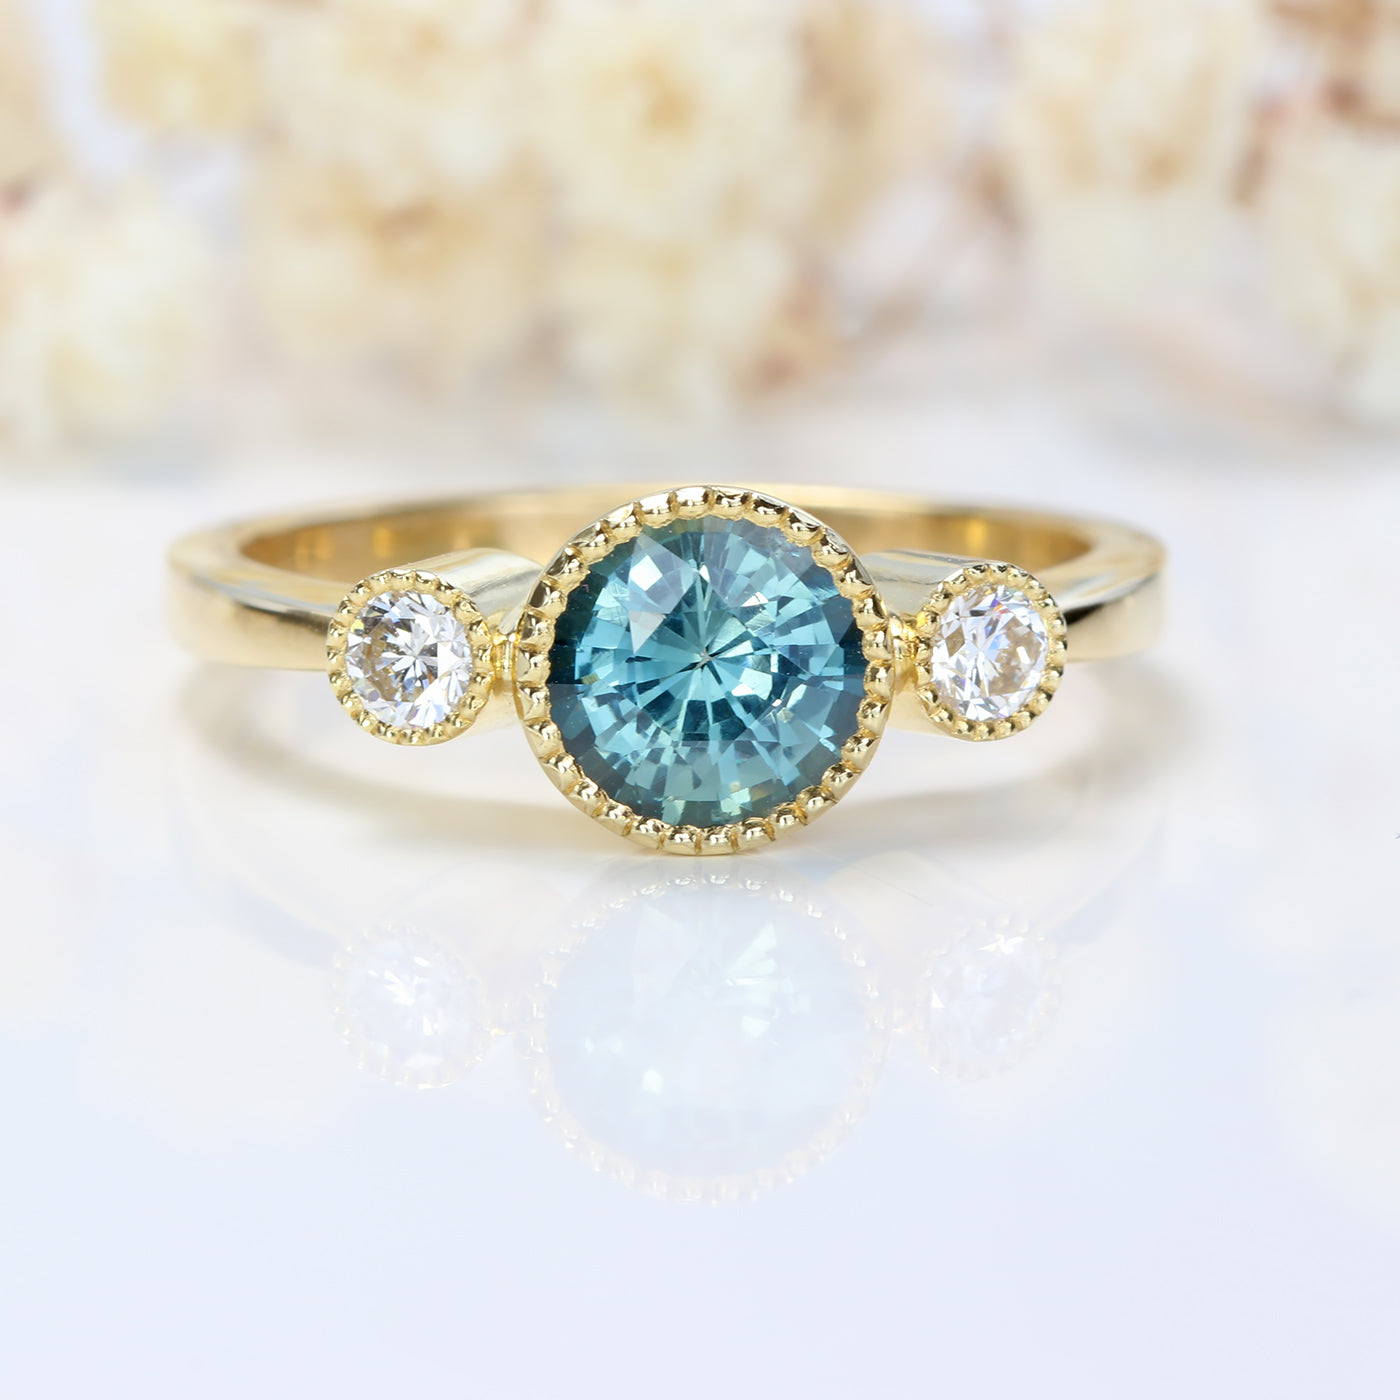 18ct Gold Teal Sapphire & Diamond Trilogy Engagement Ring (Size M, Resize K - O)